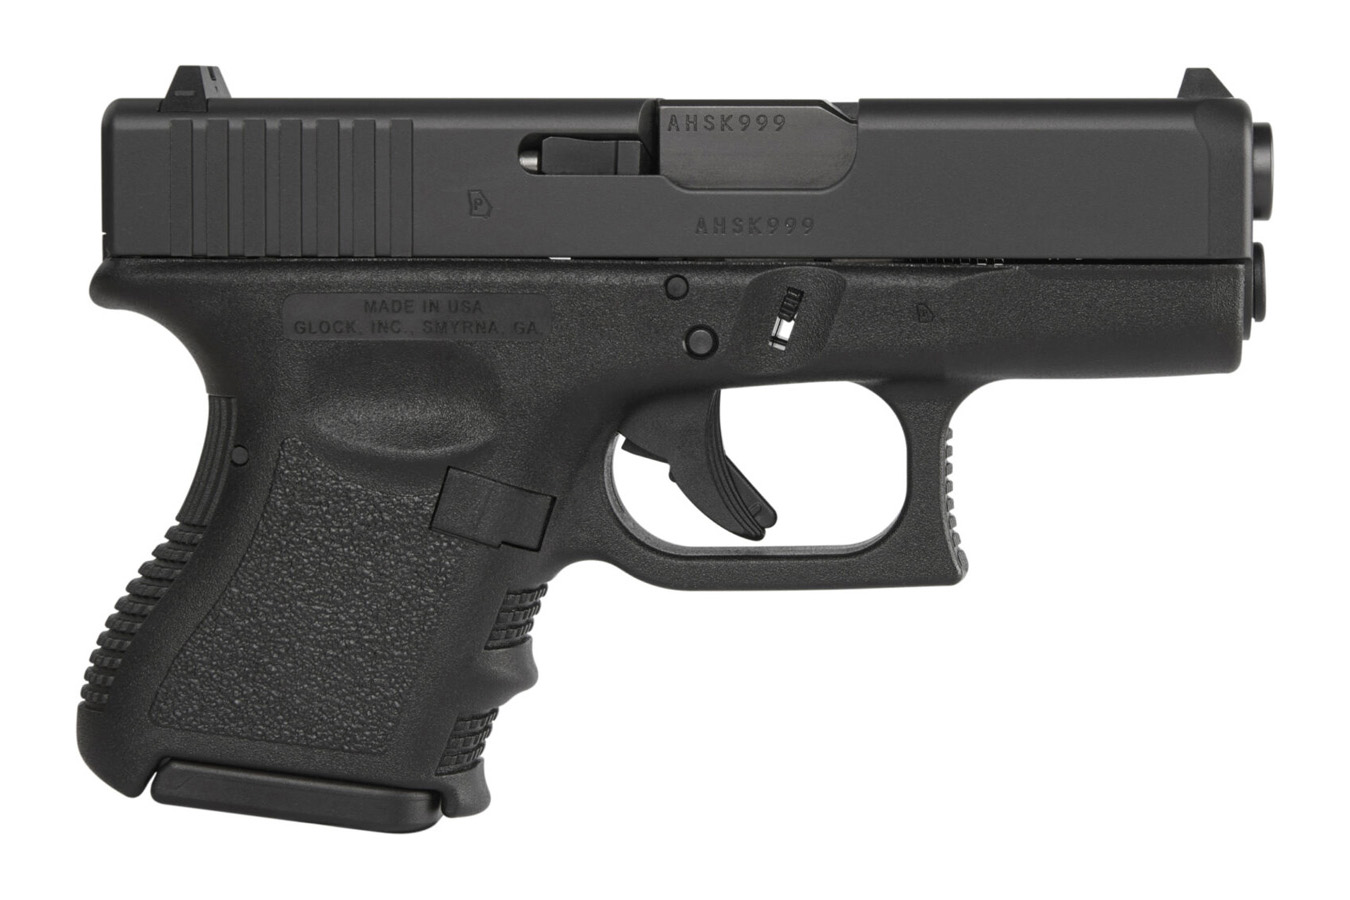 GLOCK 28 380 ACP 3.46 IN BBL 10 RD MAG